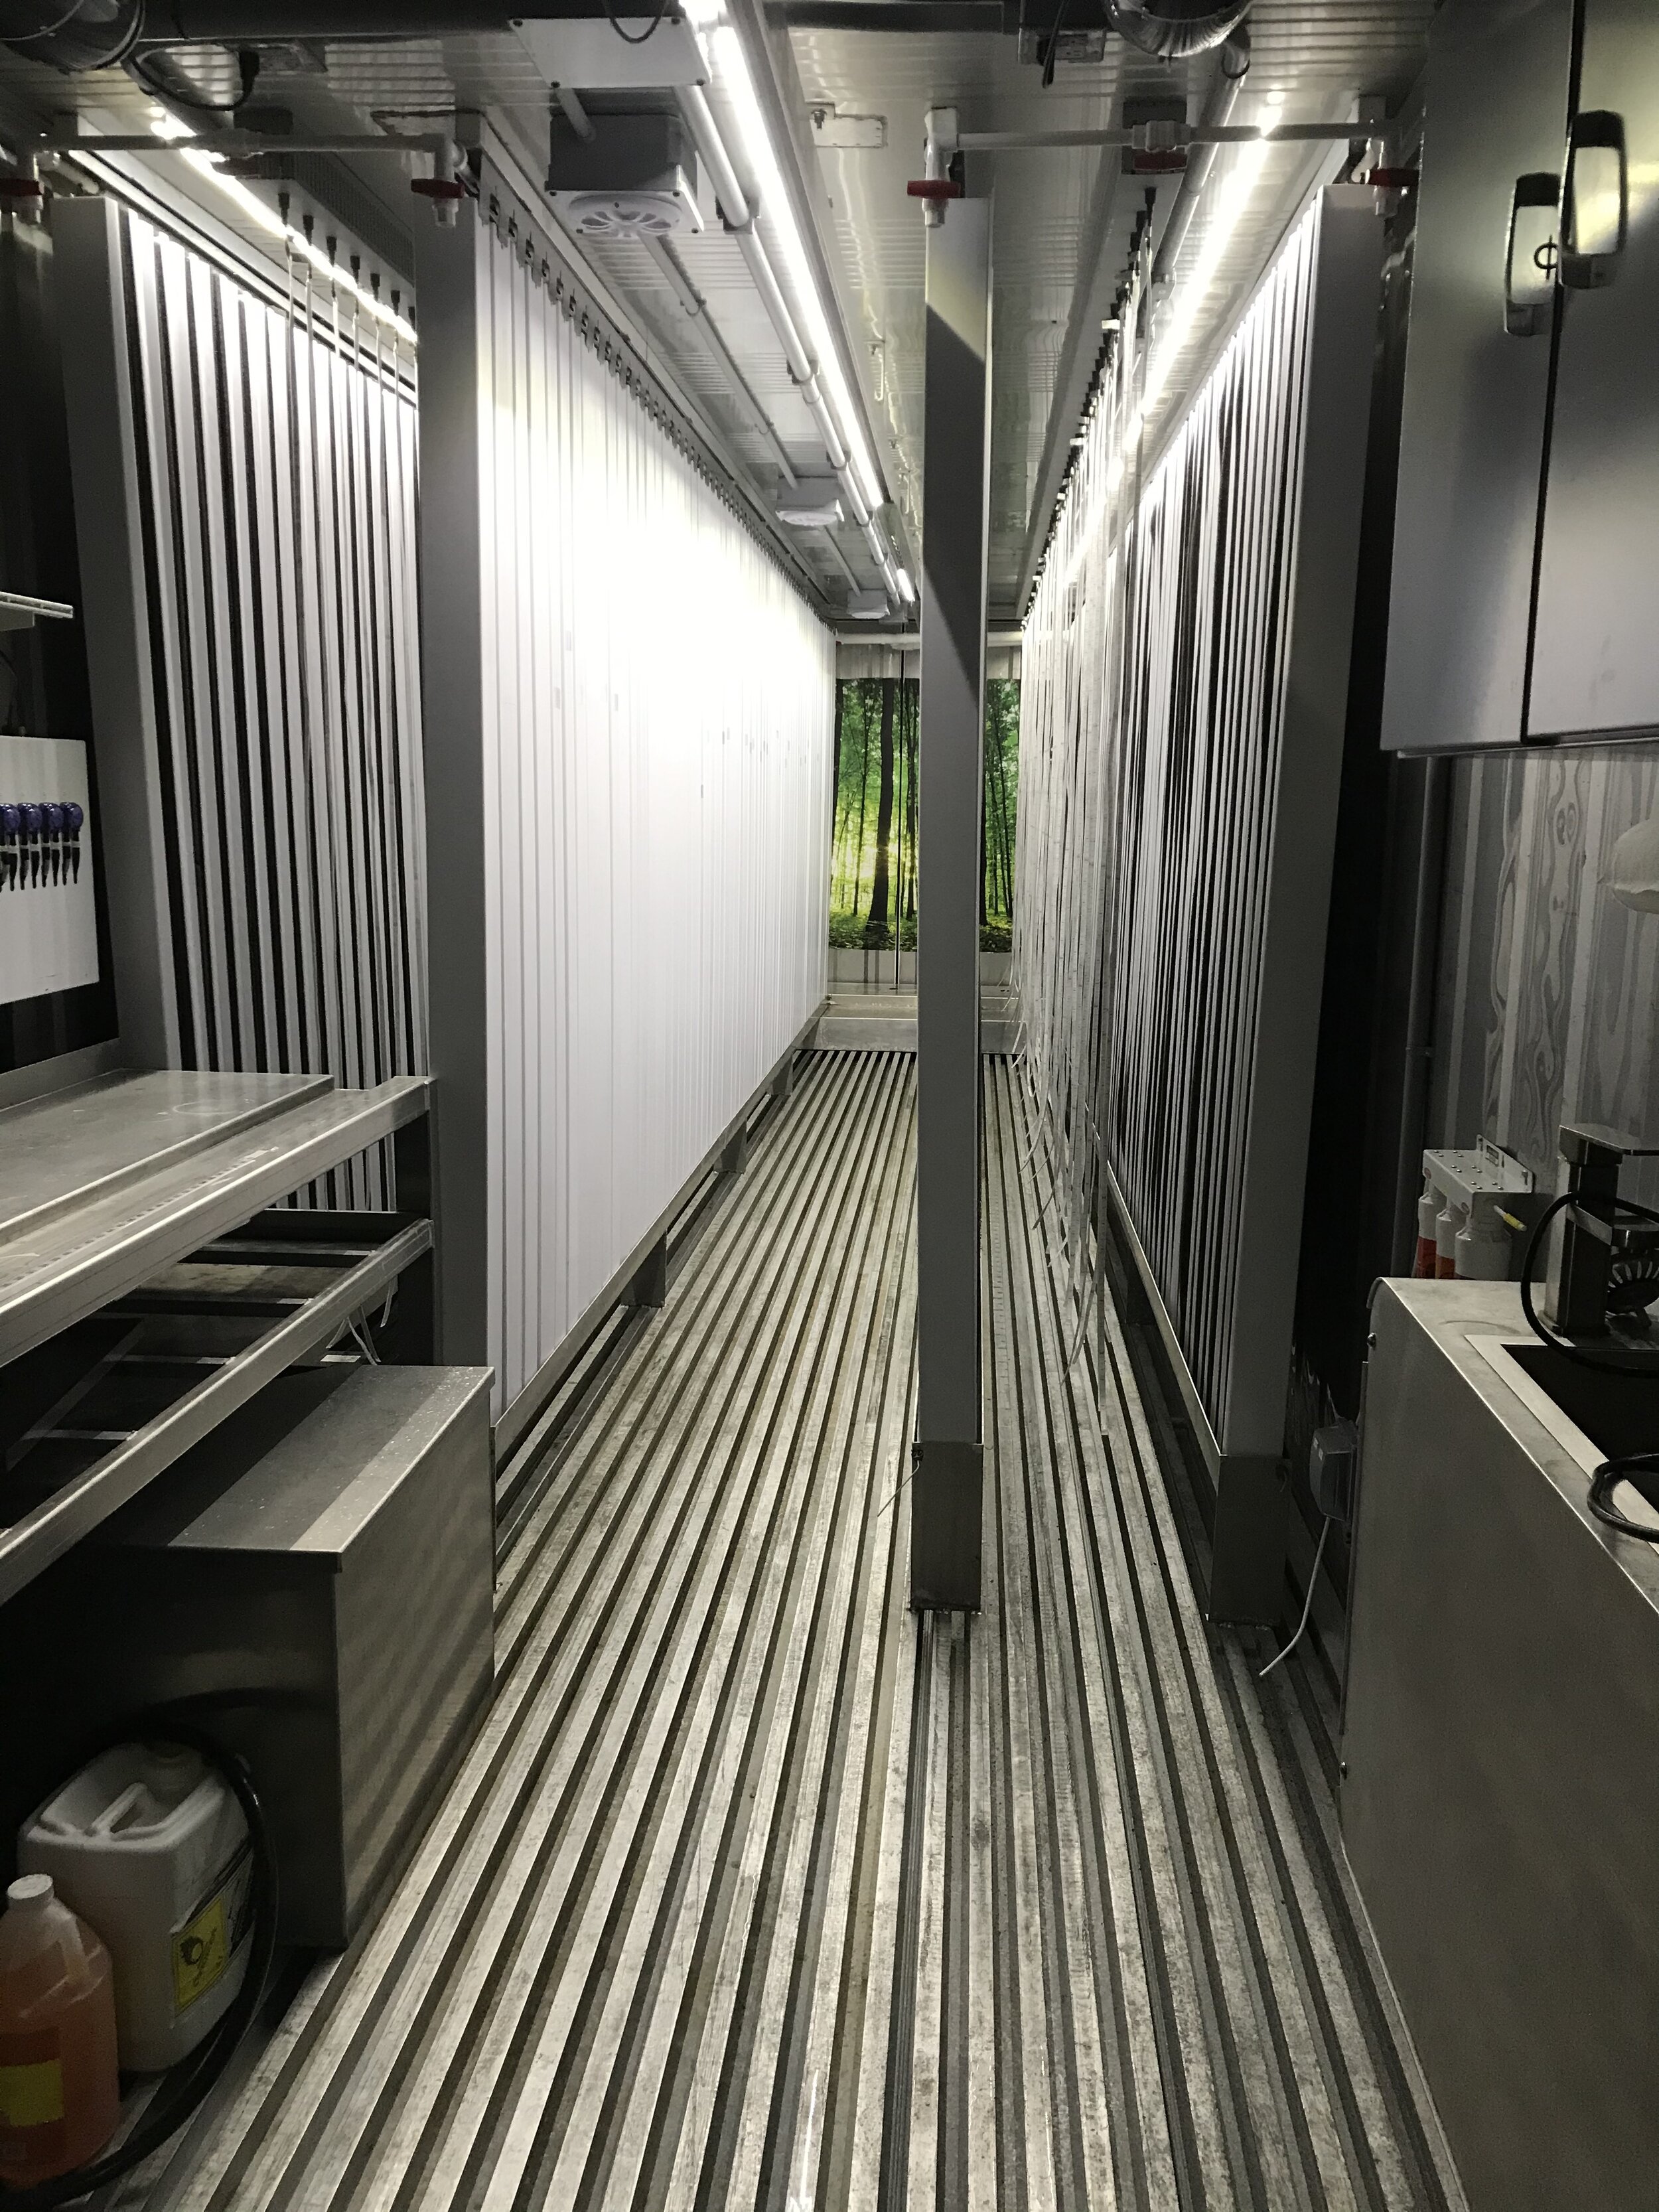 a.NH1-interior-clean-Hydroponic-Shipping-Container-Farm-Complete-Hydroponic Systems-Freight-Farms-Cost-Commercial-Vertical-Hydroponic-Systems-Pre-Owned-Freight-Farm-Leafy-Green-Machine.JPG